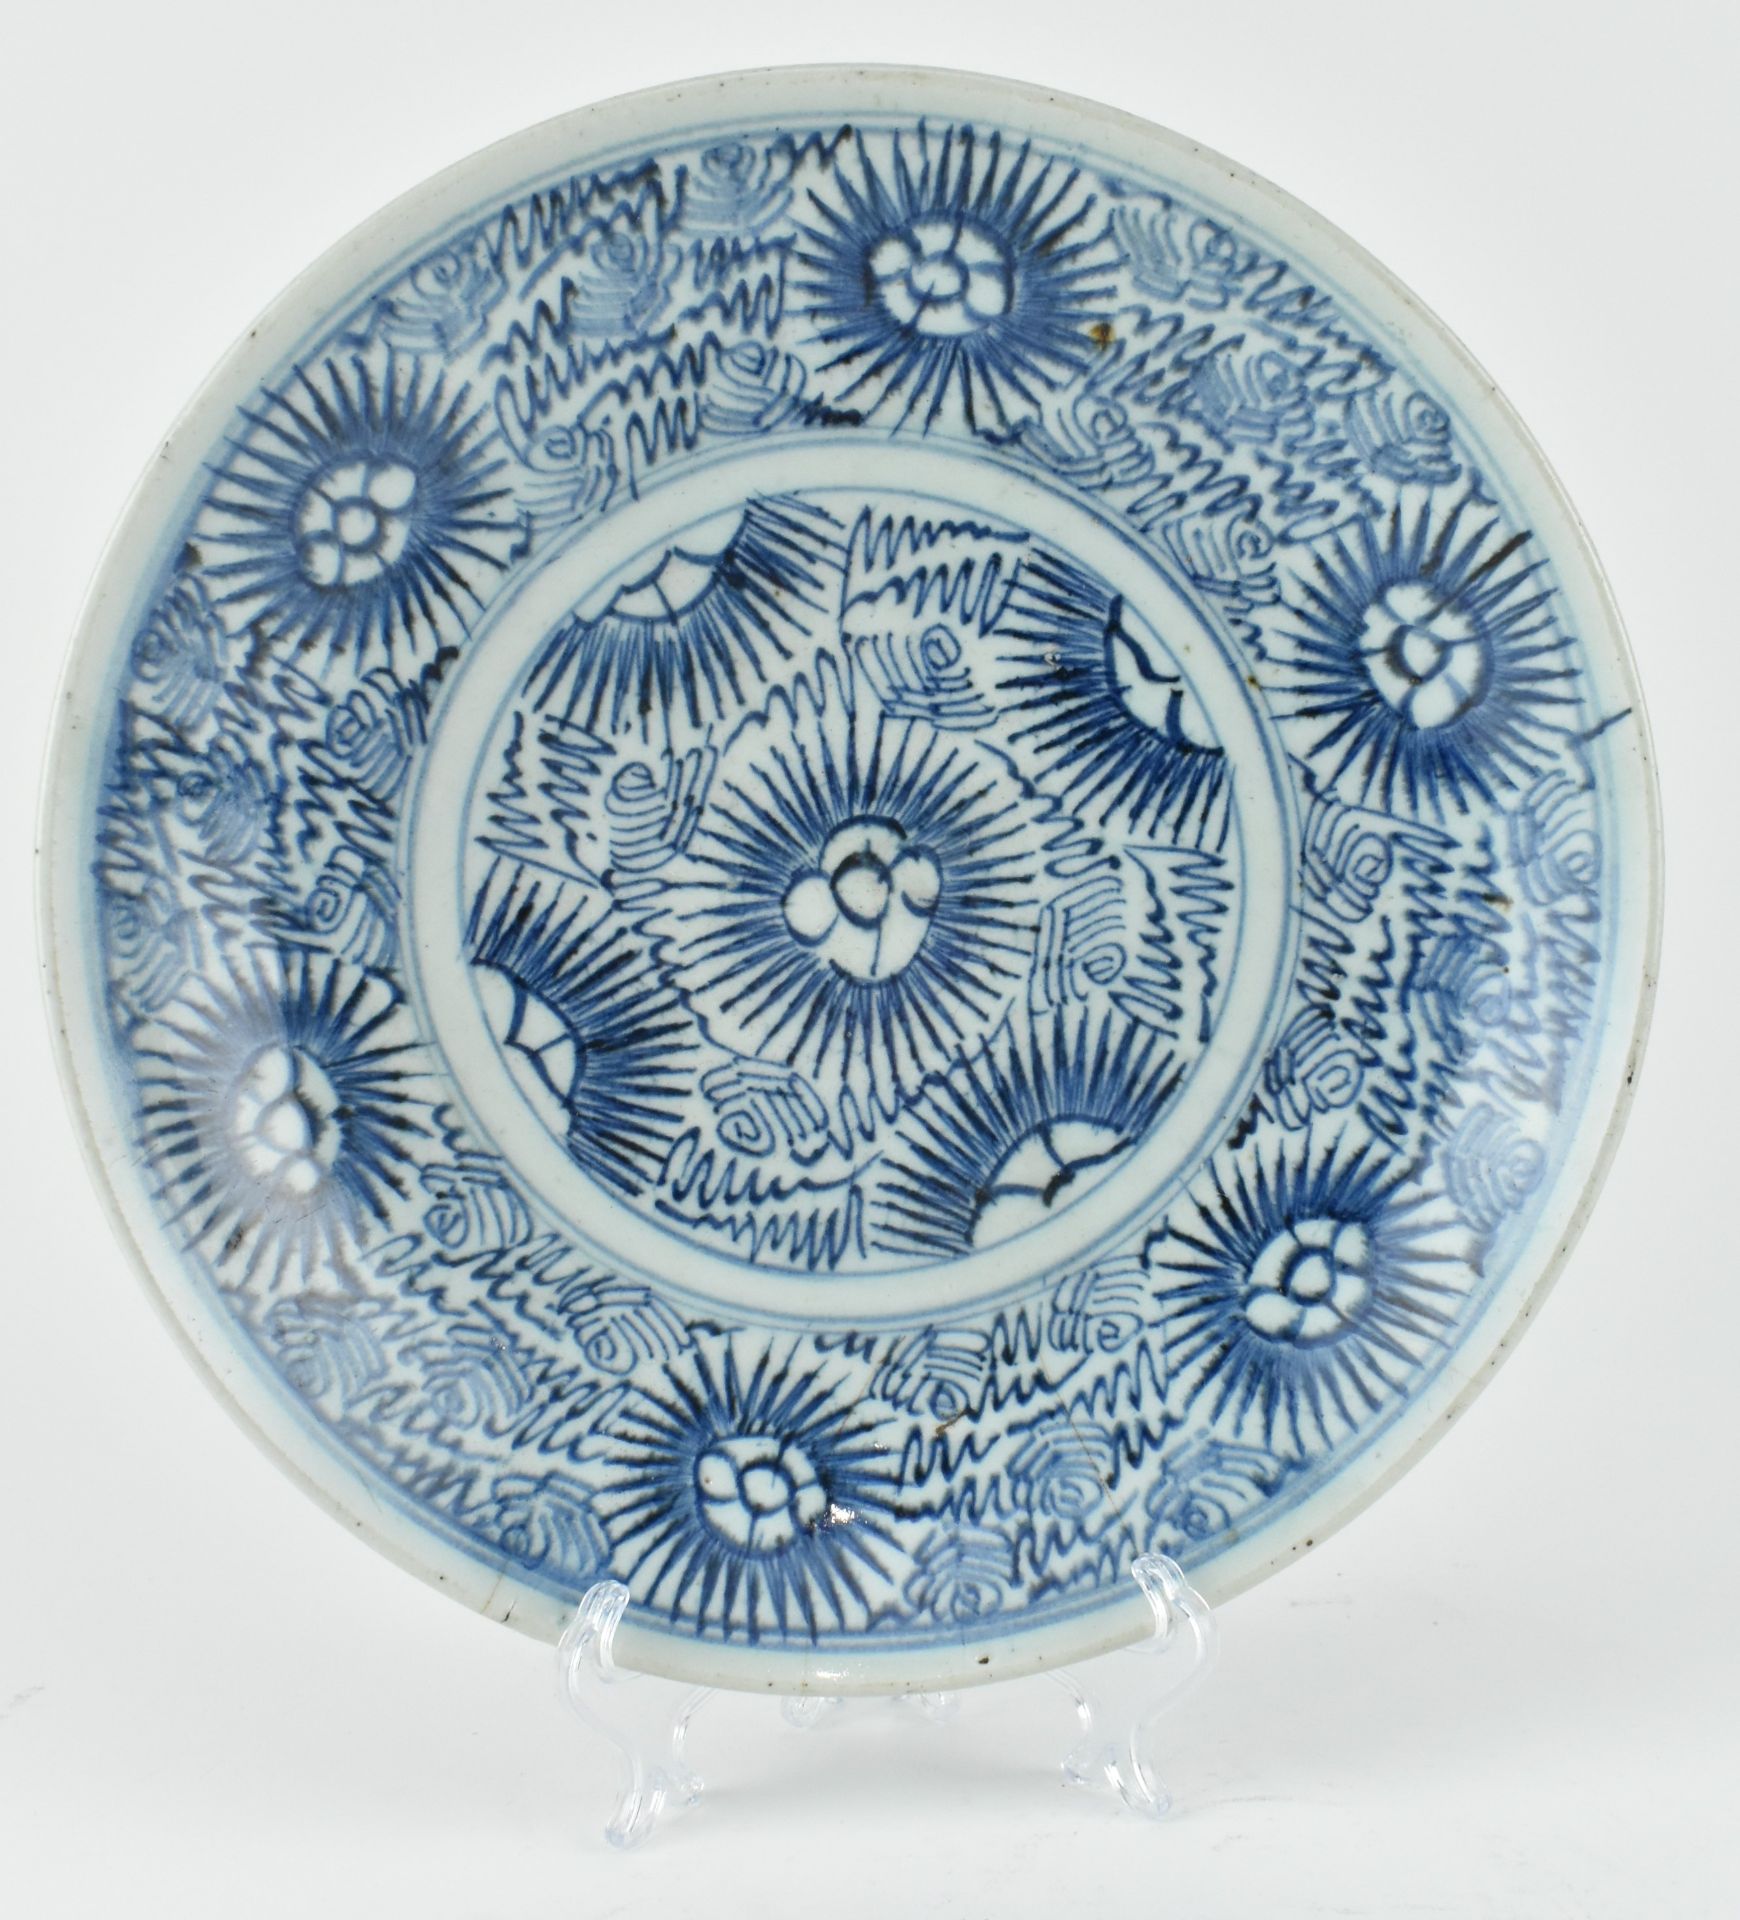 LATE 19TH CENTURY BLUE AND WHITE STARBURST CHARGER - Image 2 of 5